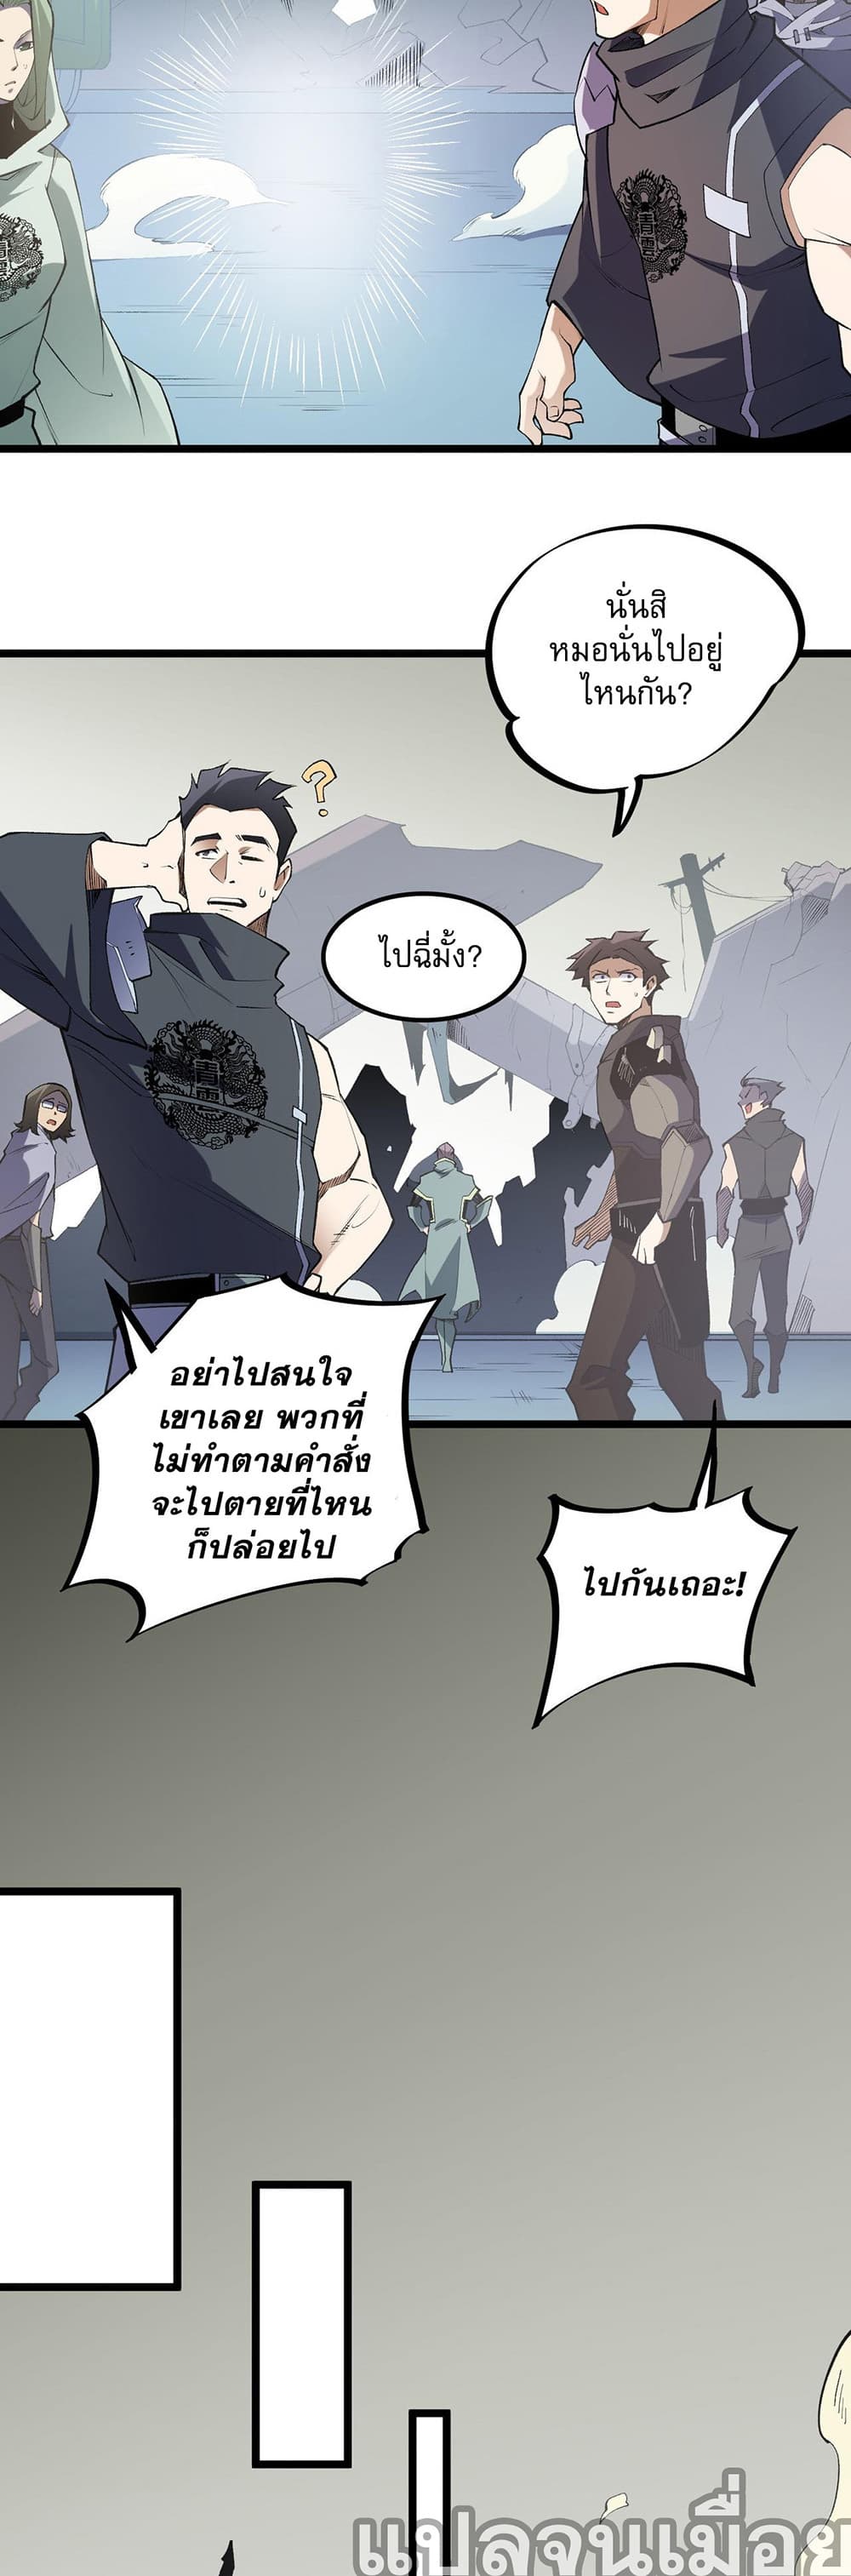 Job Changing for the Entire Population: The Jobless Me Will Terminate the Gods ฉันคือผู้เล่นไร้อาชีพที่สังหารเหล่าเทพ 40-40